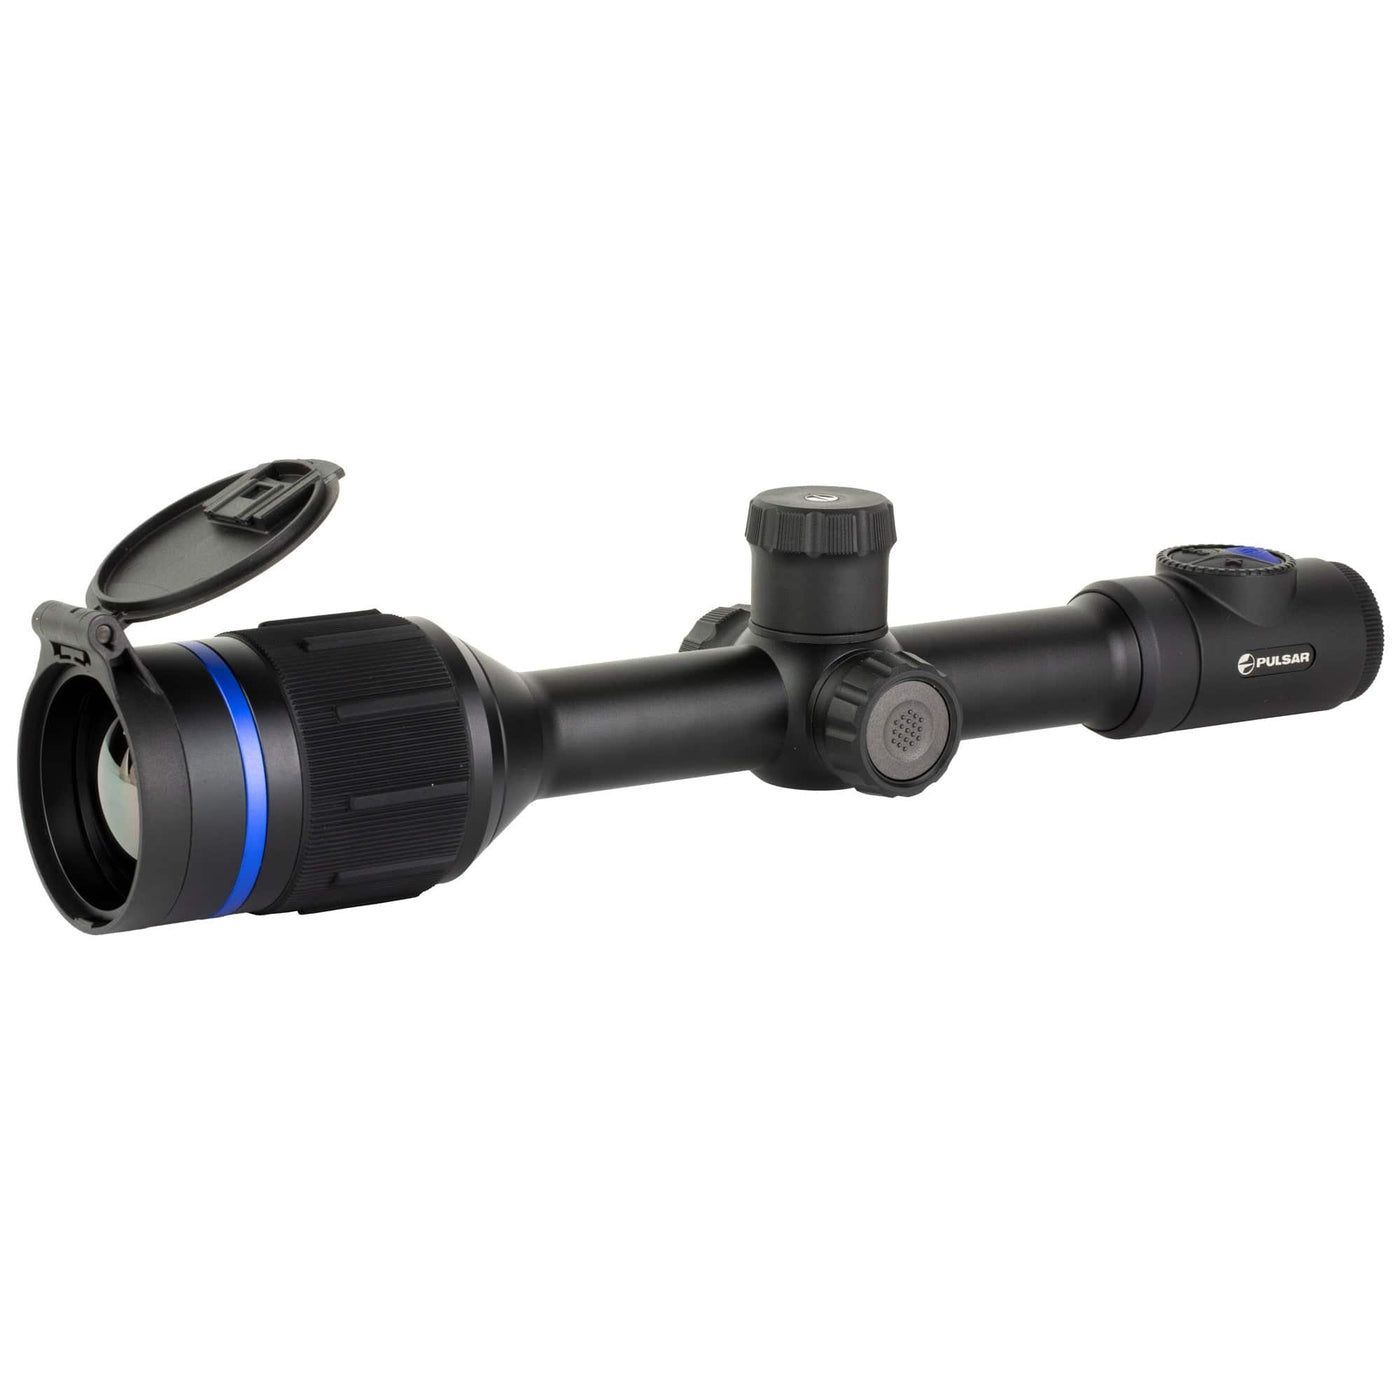 Pulsar Pulsar Thermion 2 XP50 Pro Thermal Riflescope Nightvision And Thermal